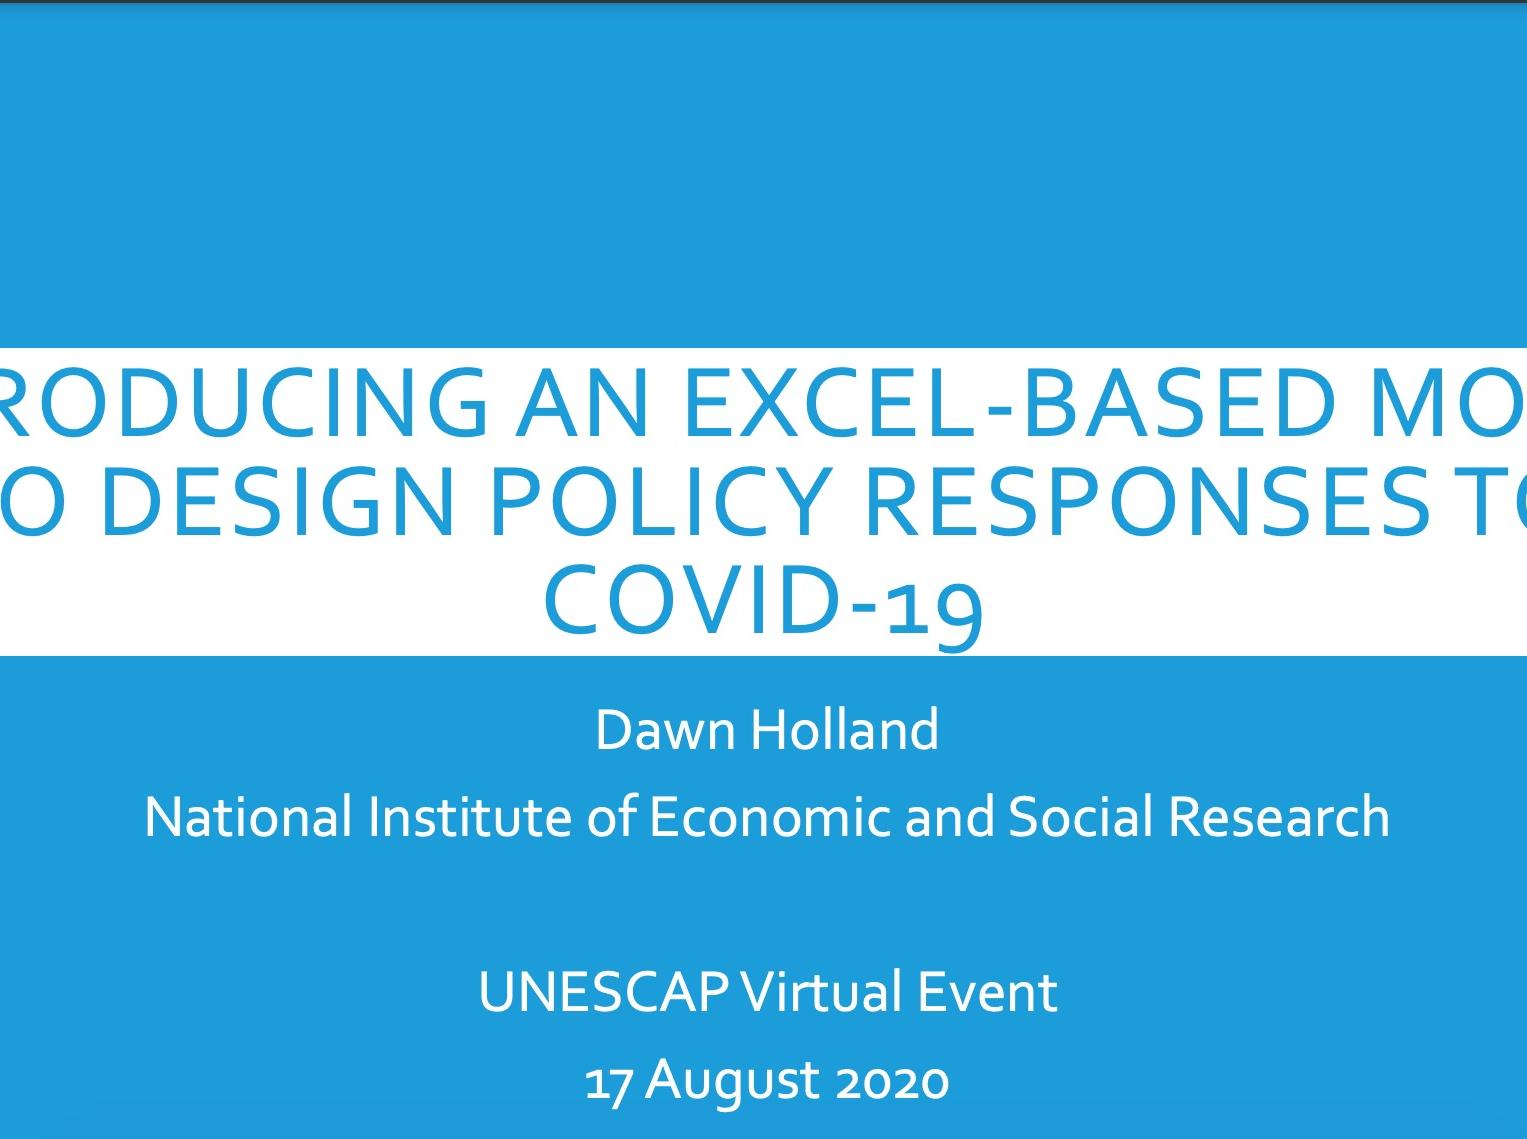 Assessing the impact of COVID-19 in Asia and the Pacific and designing policy responses: An Excel-based model